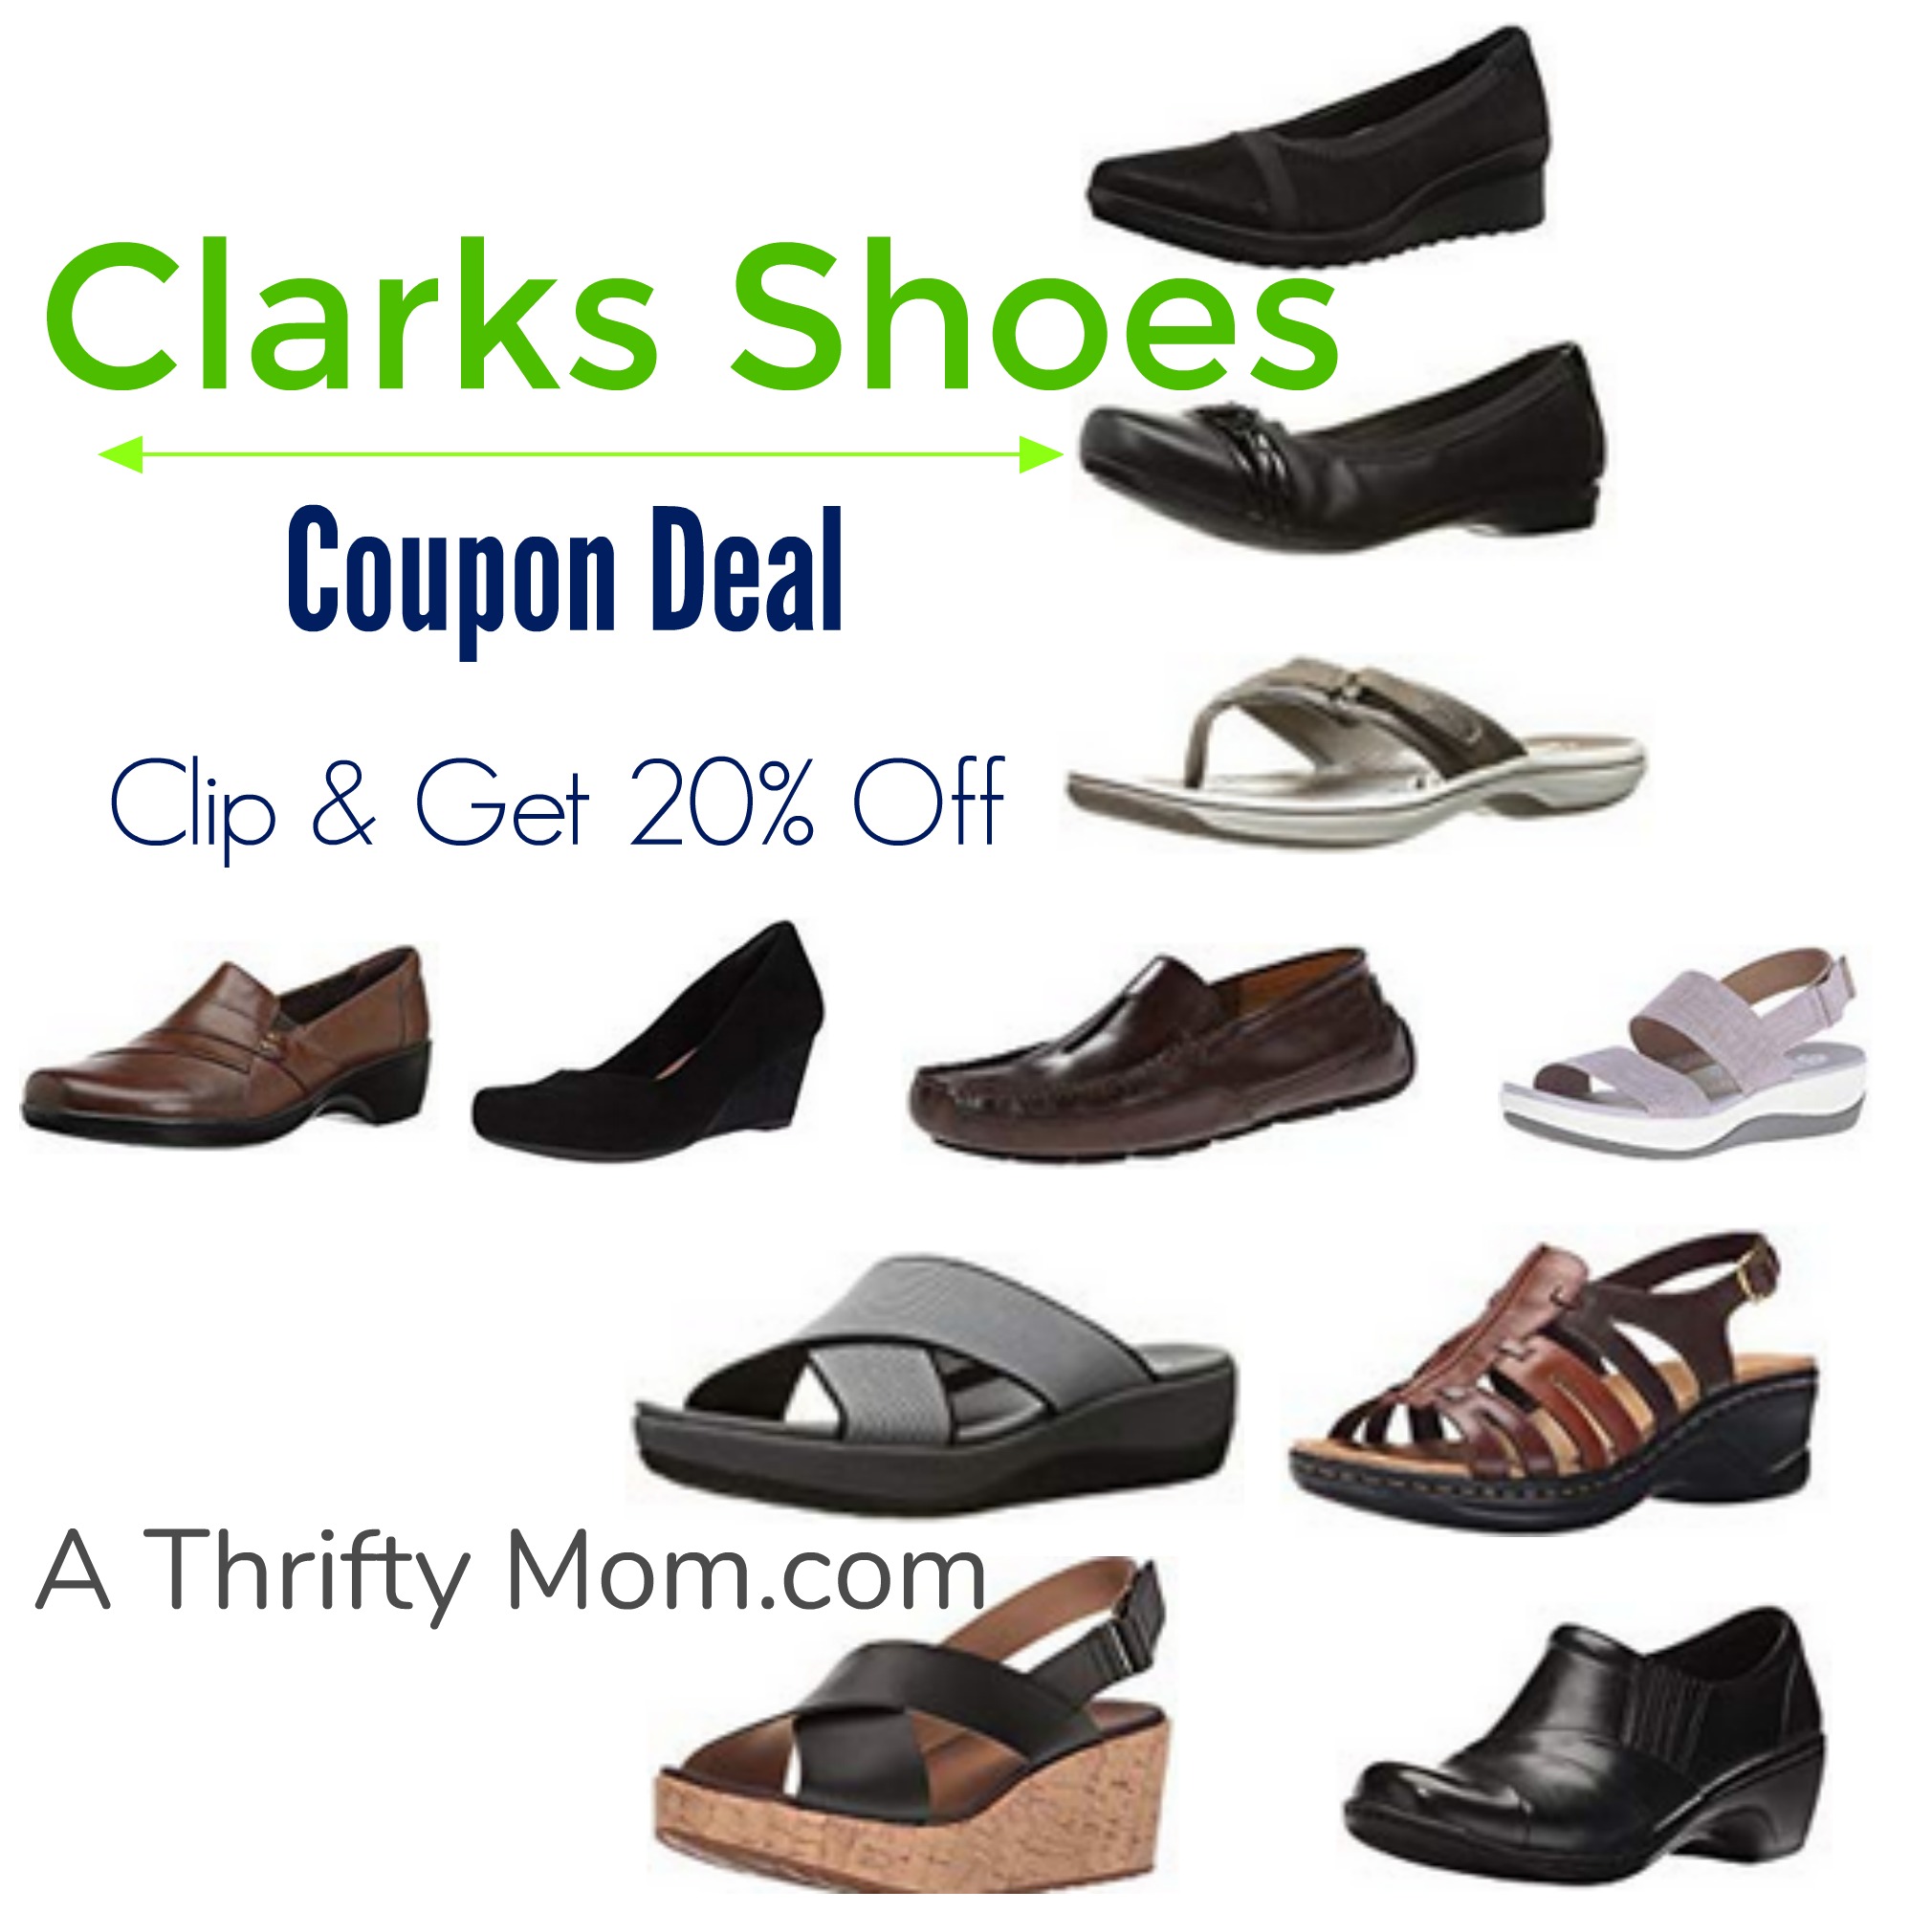 clarks shoes 20 off coupon